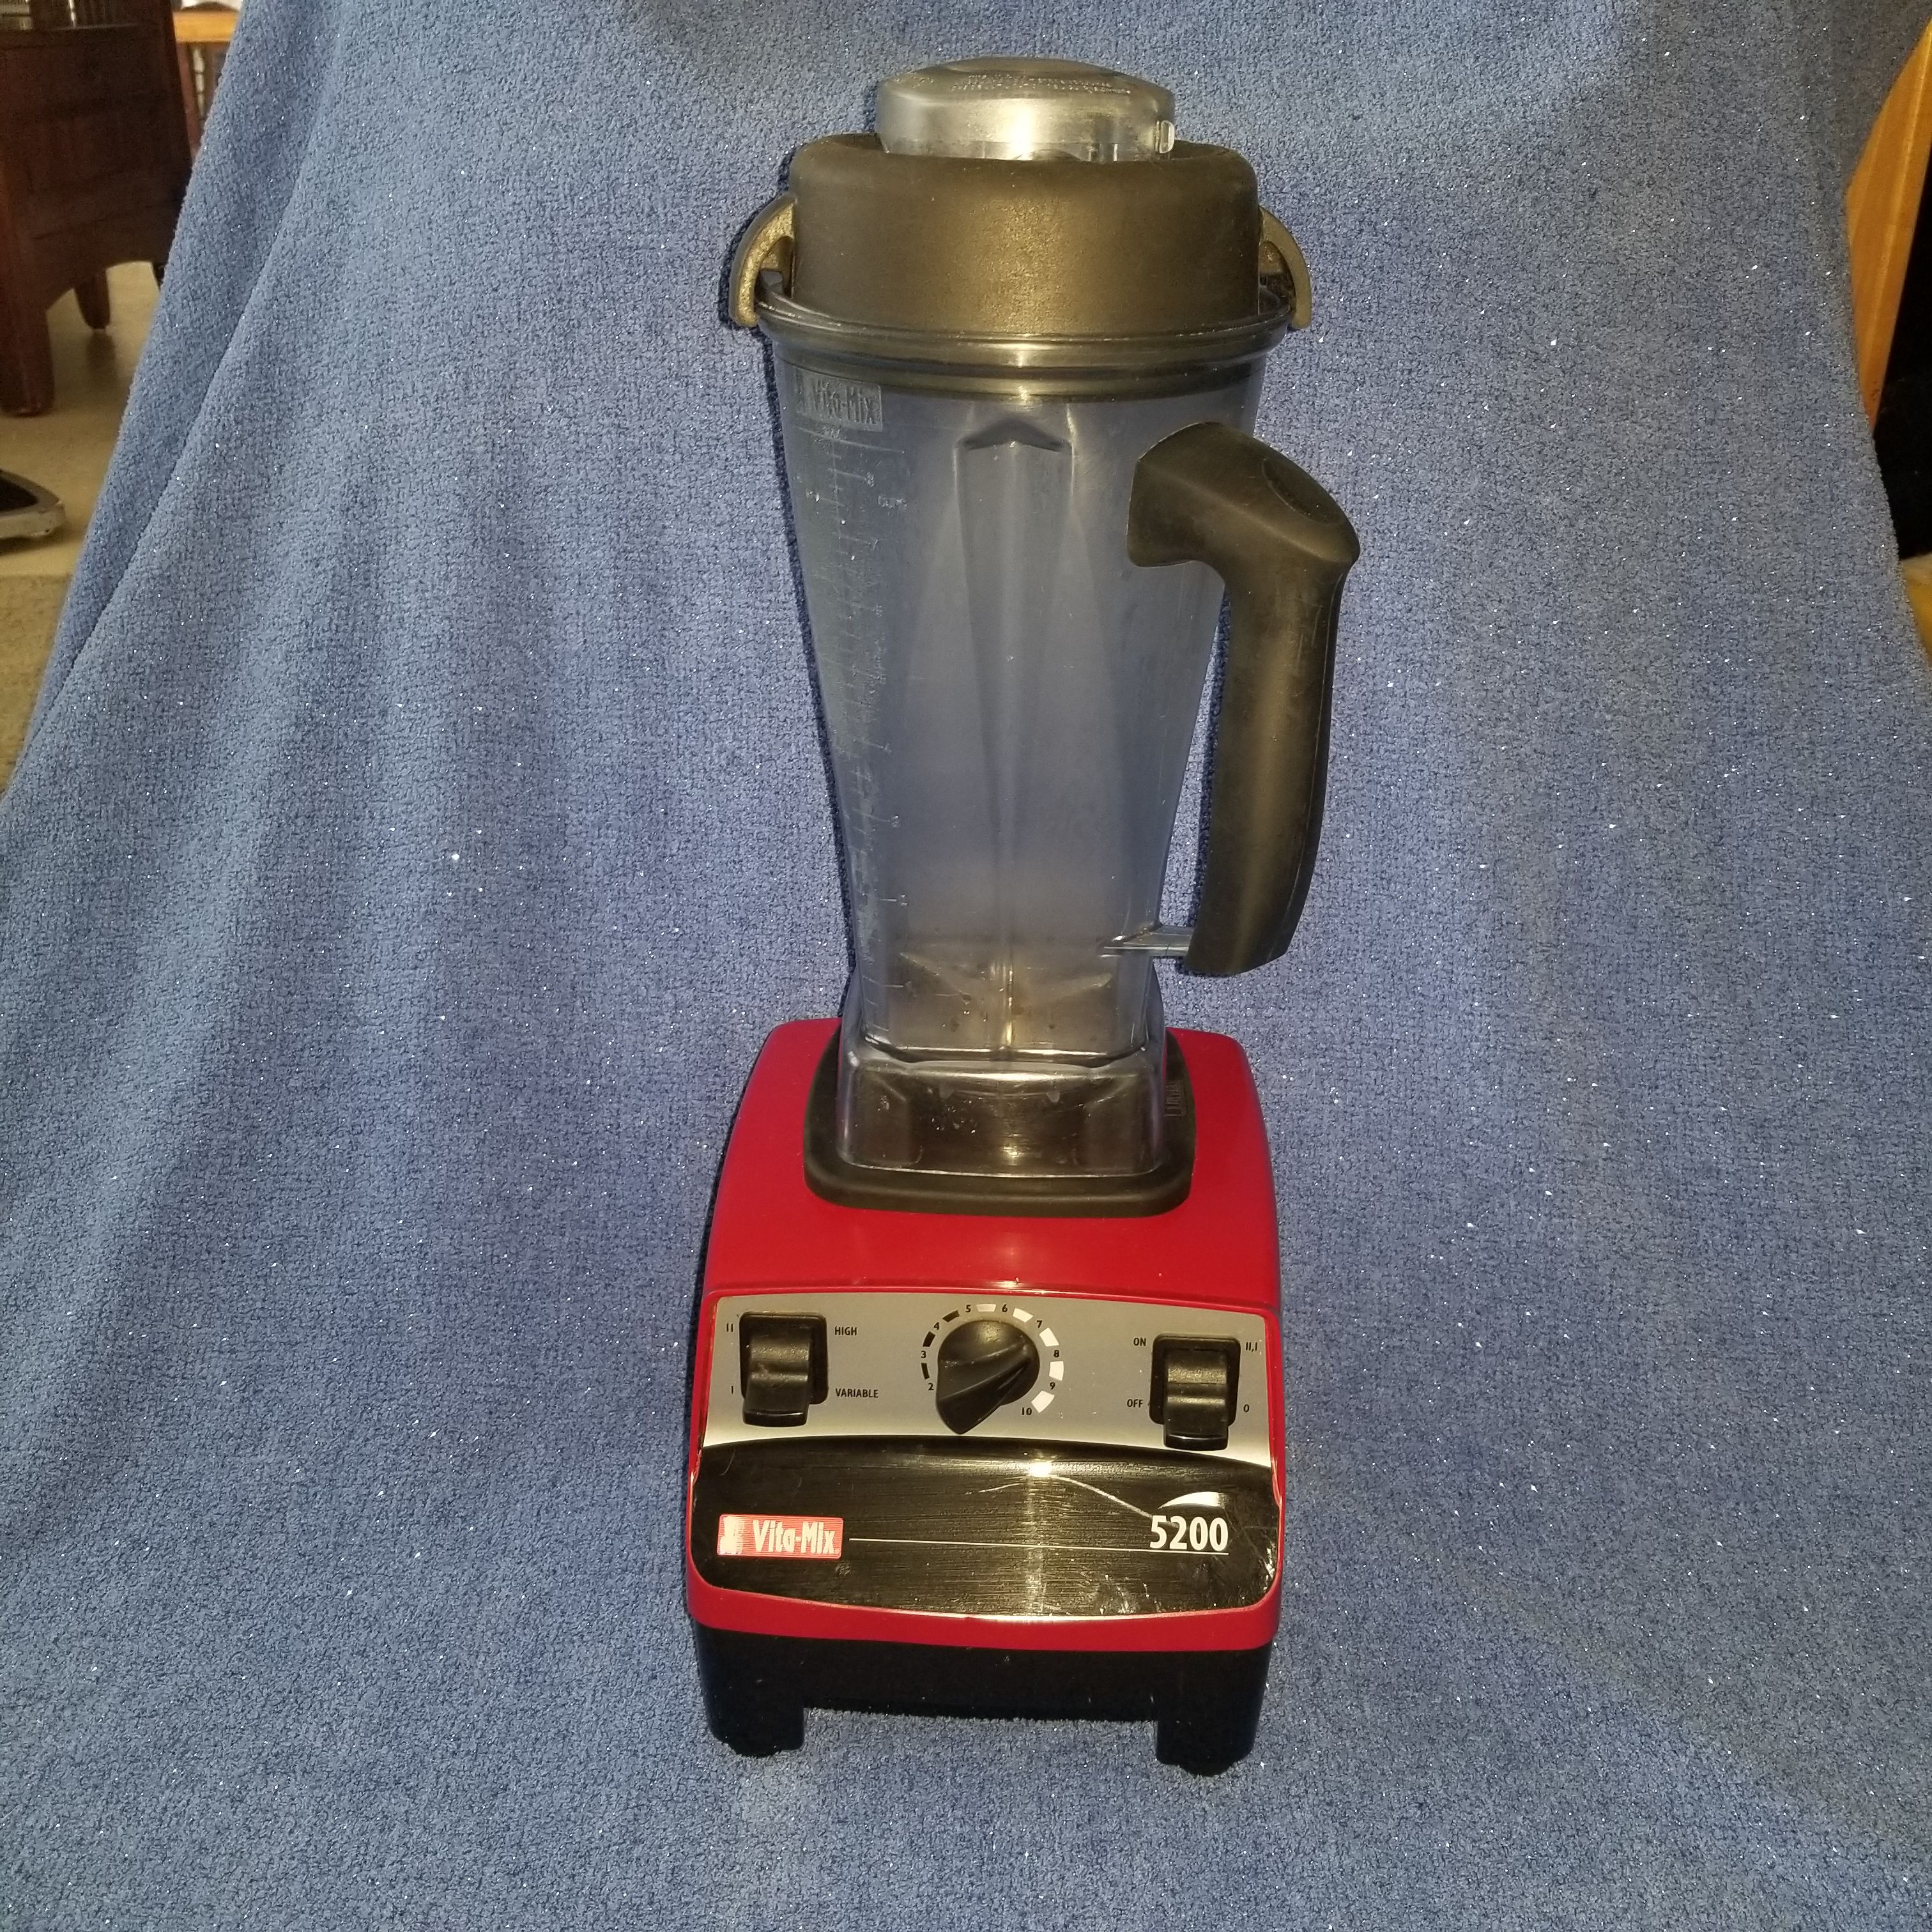 VitaMix the Supper Blender with the Power to Make Hot Soup